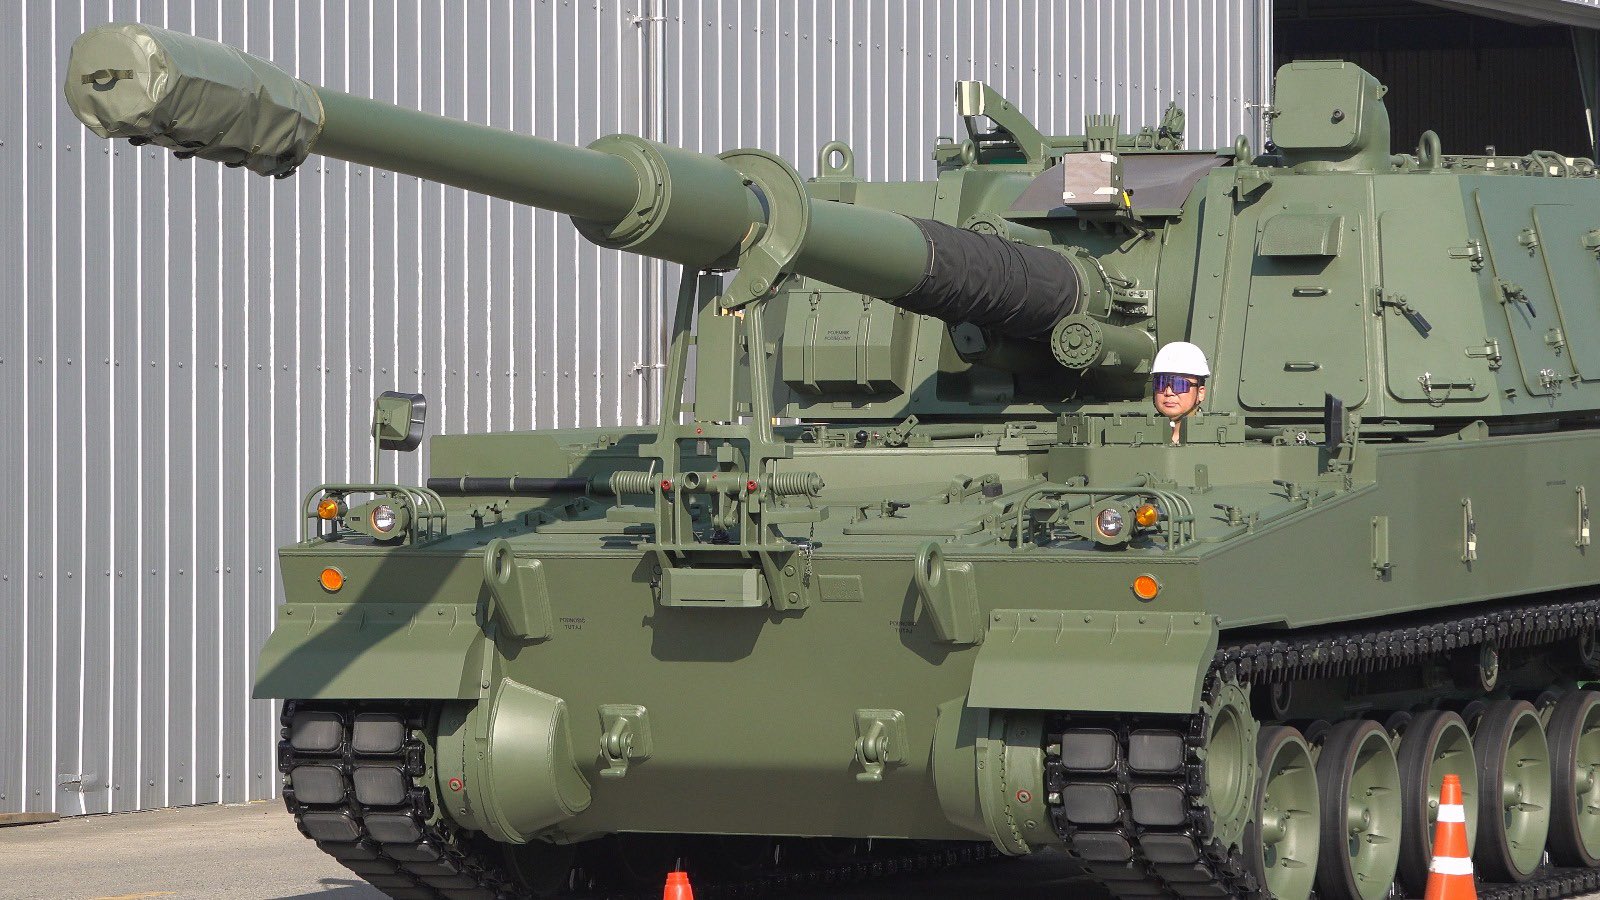 Hanwha Aerospace has significantly increased its production capacity to ensure the timely delivery of the K9PL self-propelled howitzers, often surpassing the agreed-upon deadlines.